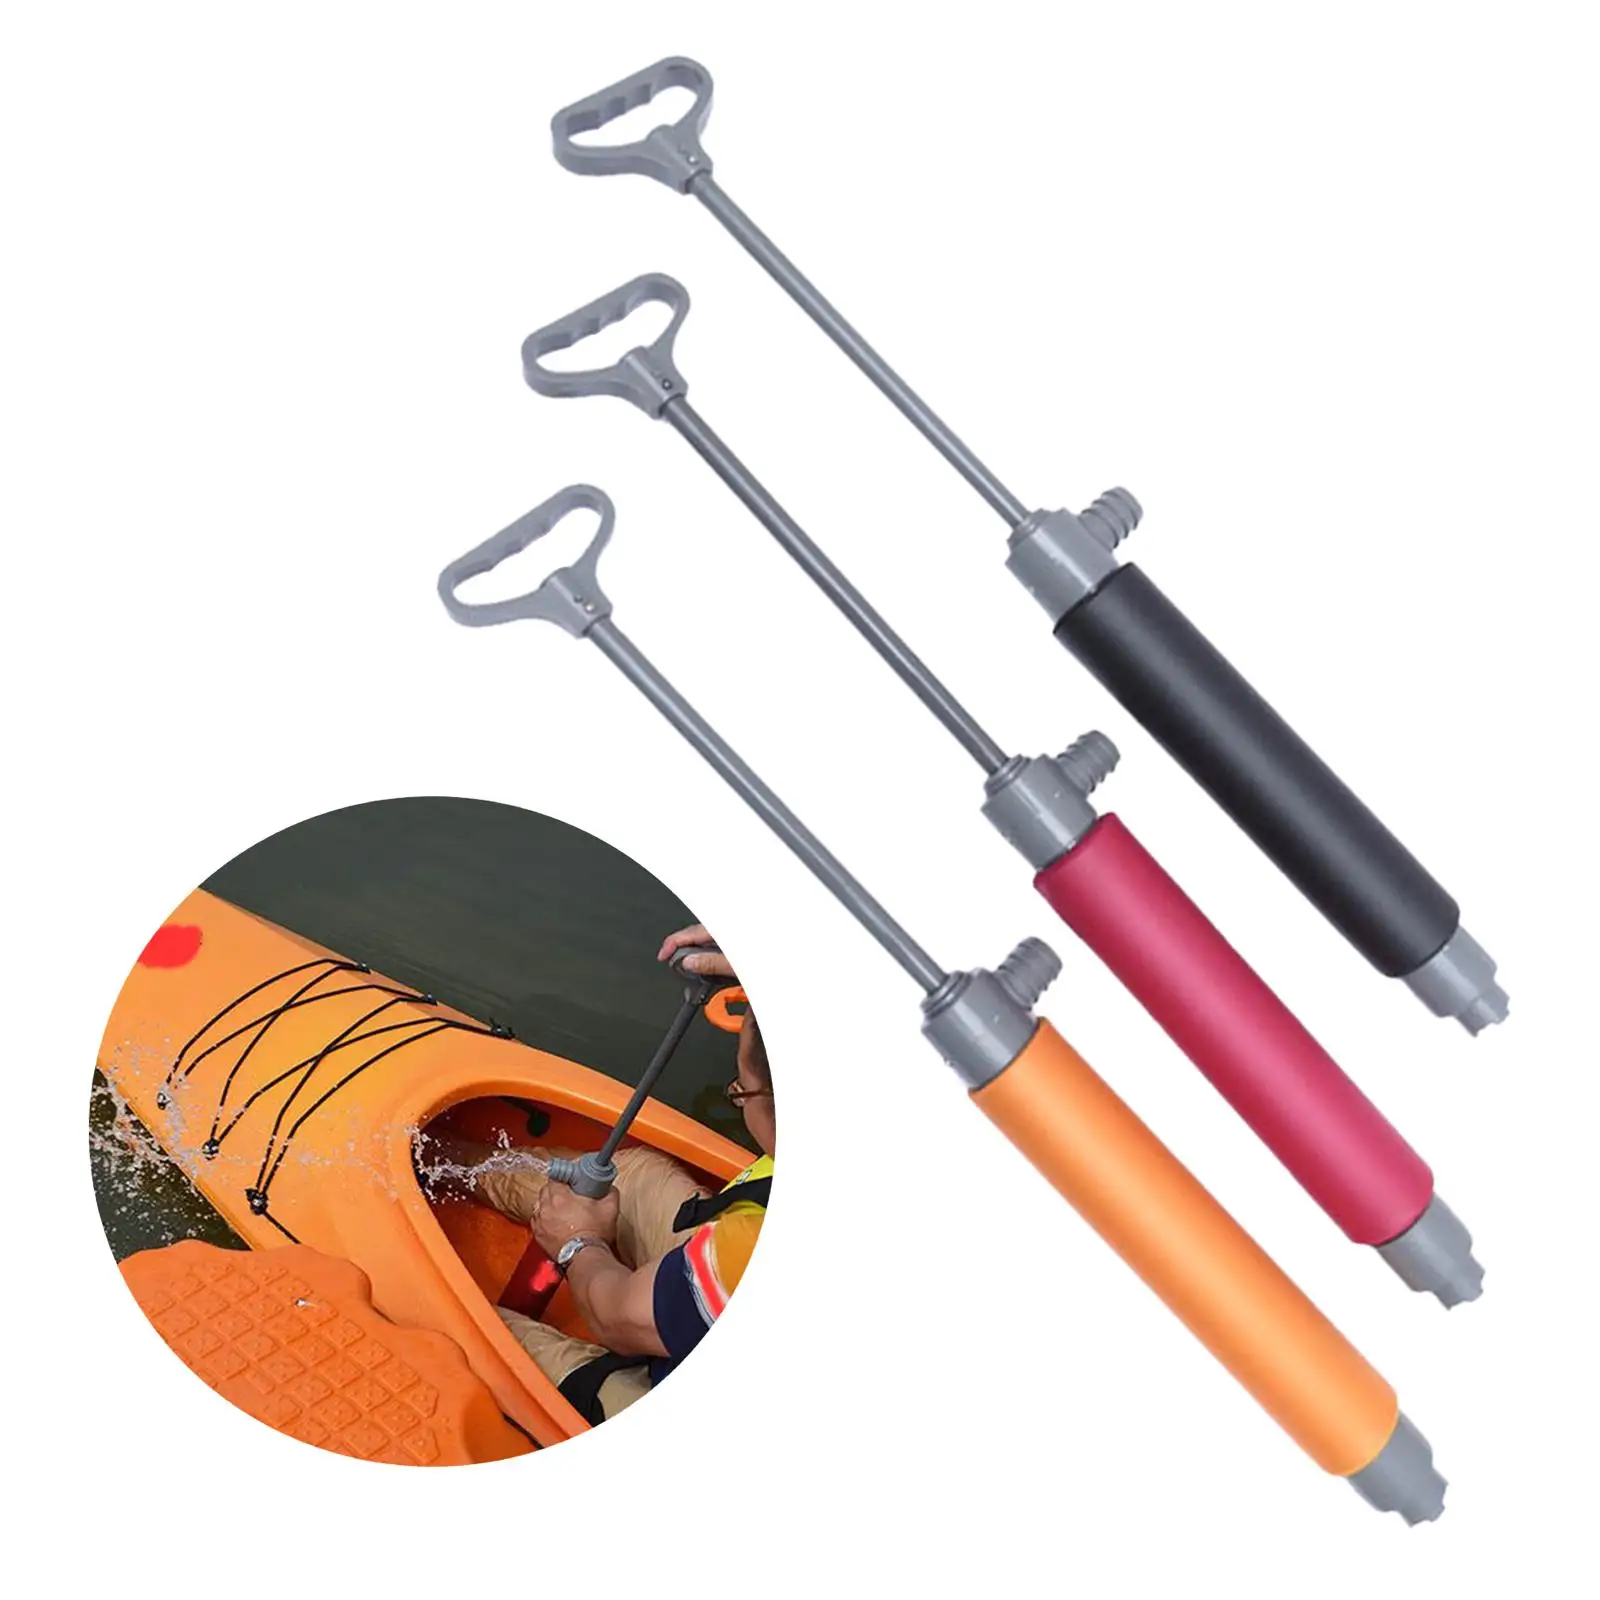 Floating Kayak Hand Pump for Kayakers Boats Survival Emergency Equipment